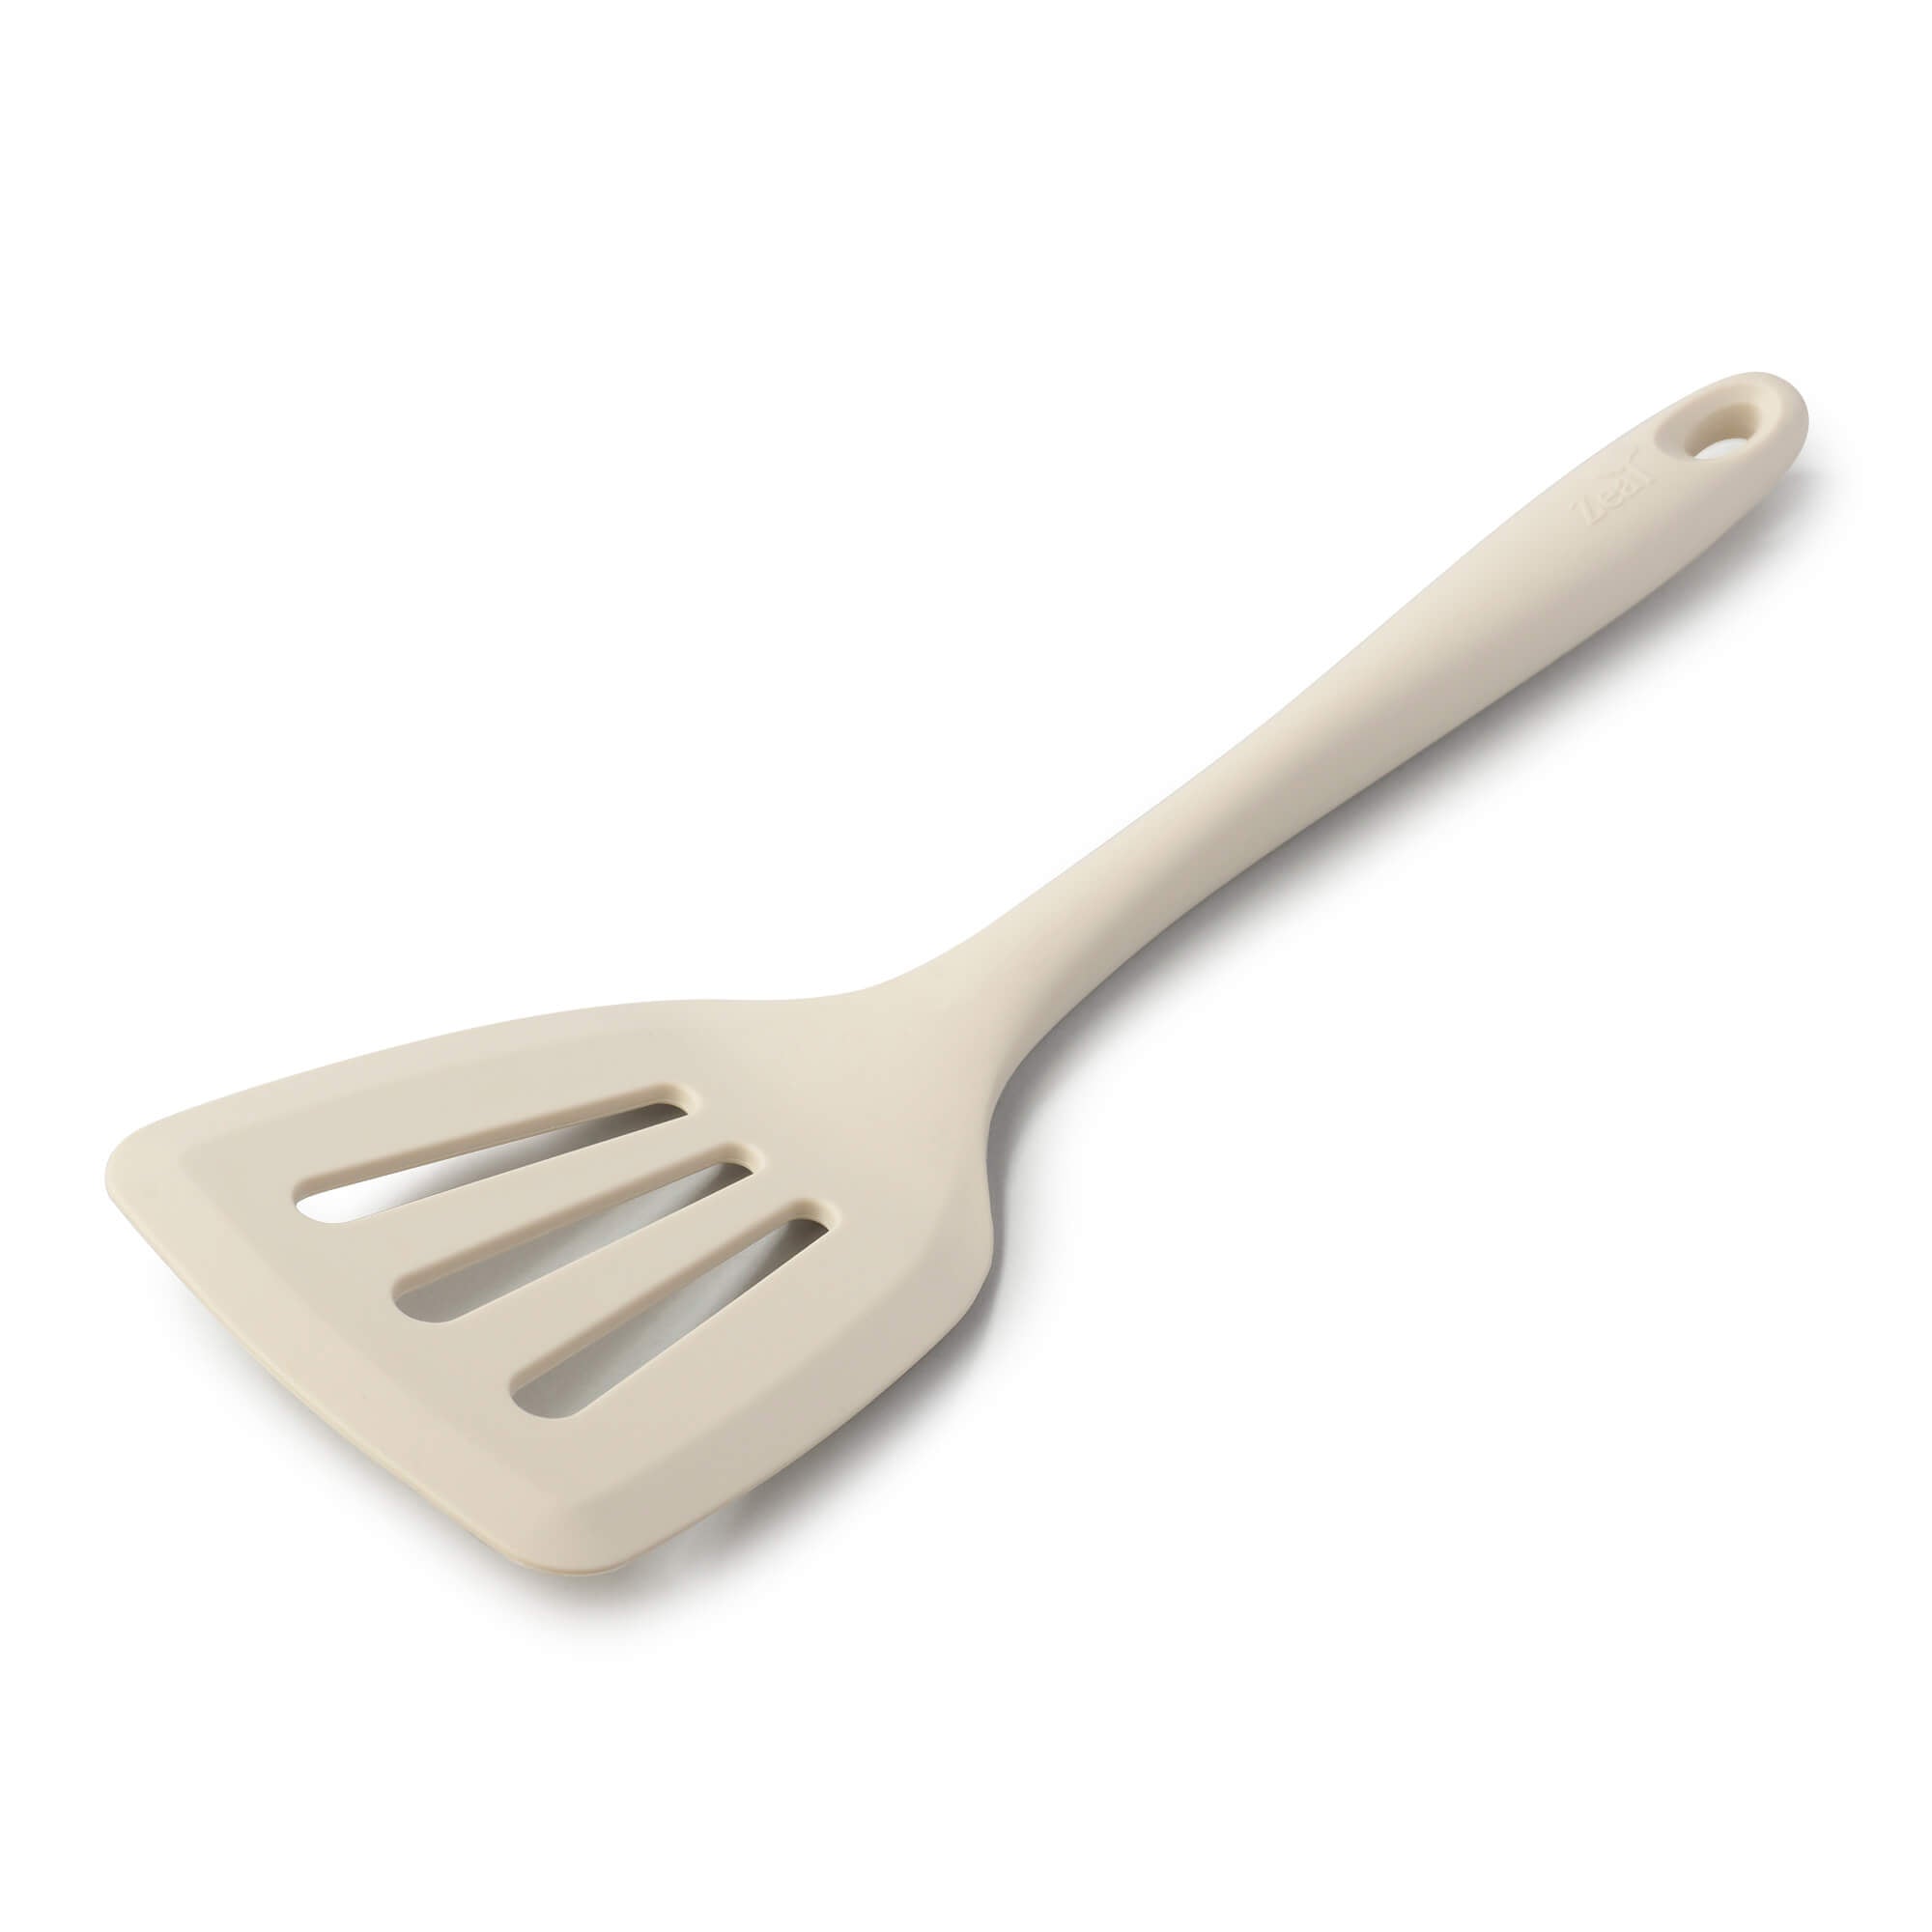 Choice 14 1/4 Flexible Stainless Steel Slotted Spatula / Turner